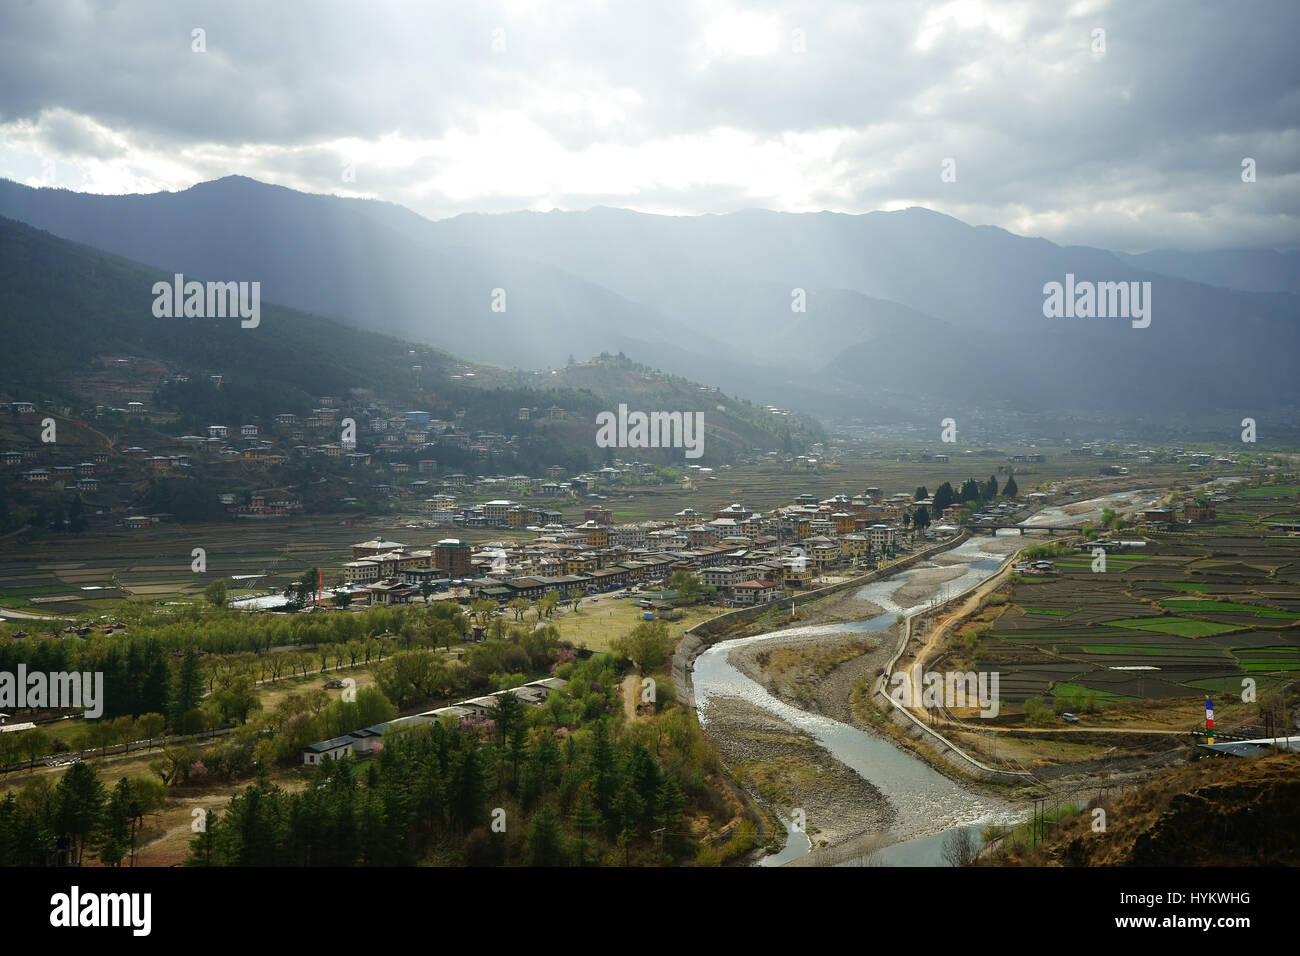 Paro valley and town Paro with rioce growing fields, Bhutan Stock Photo